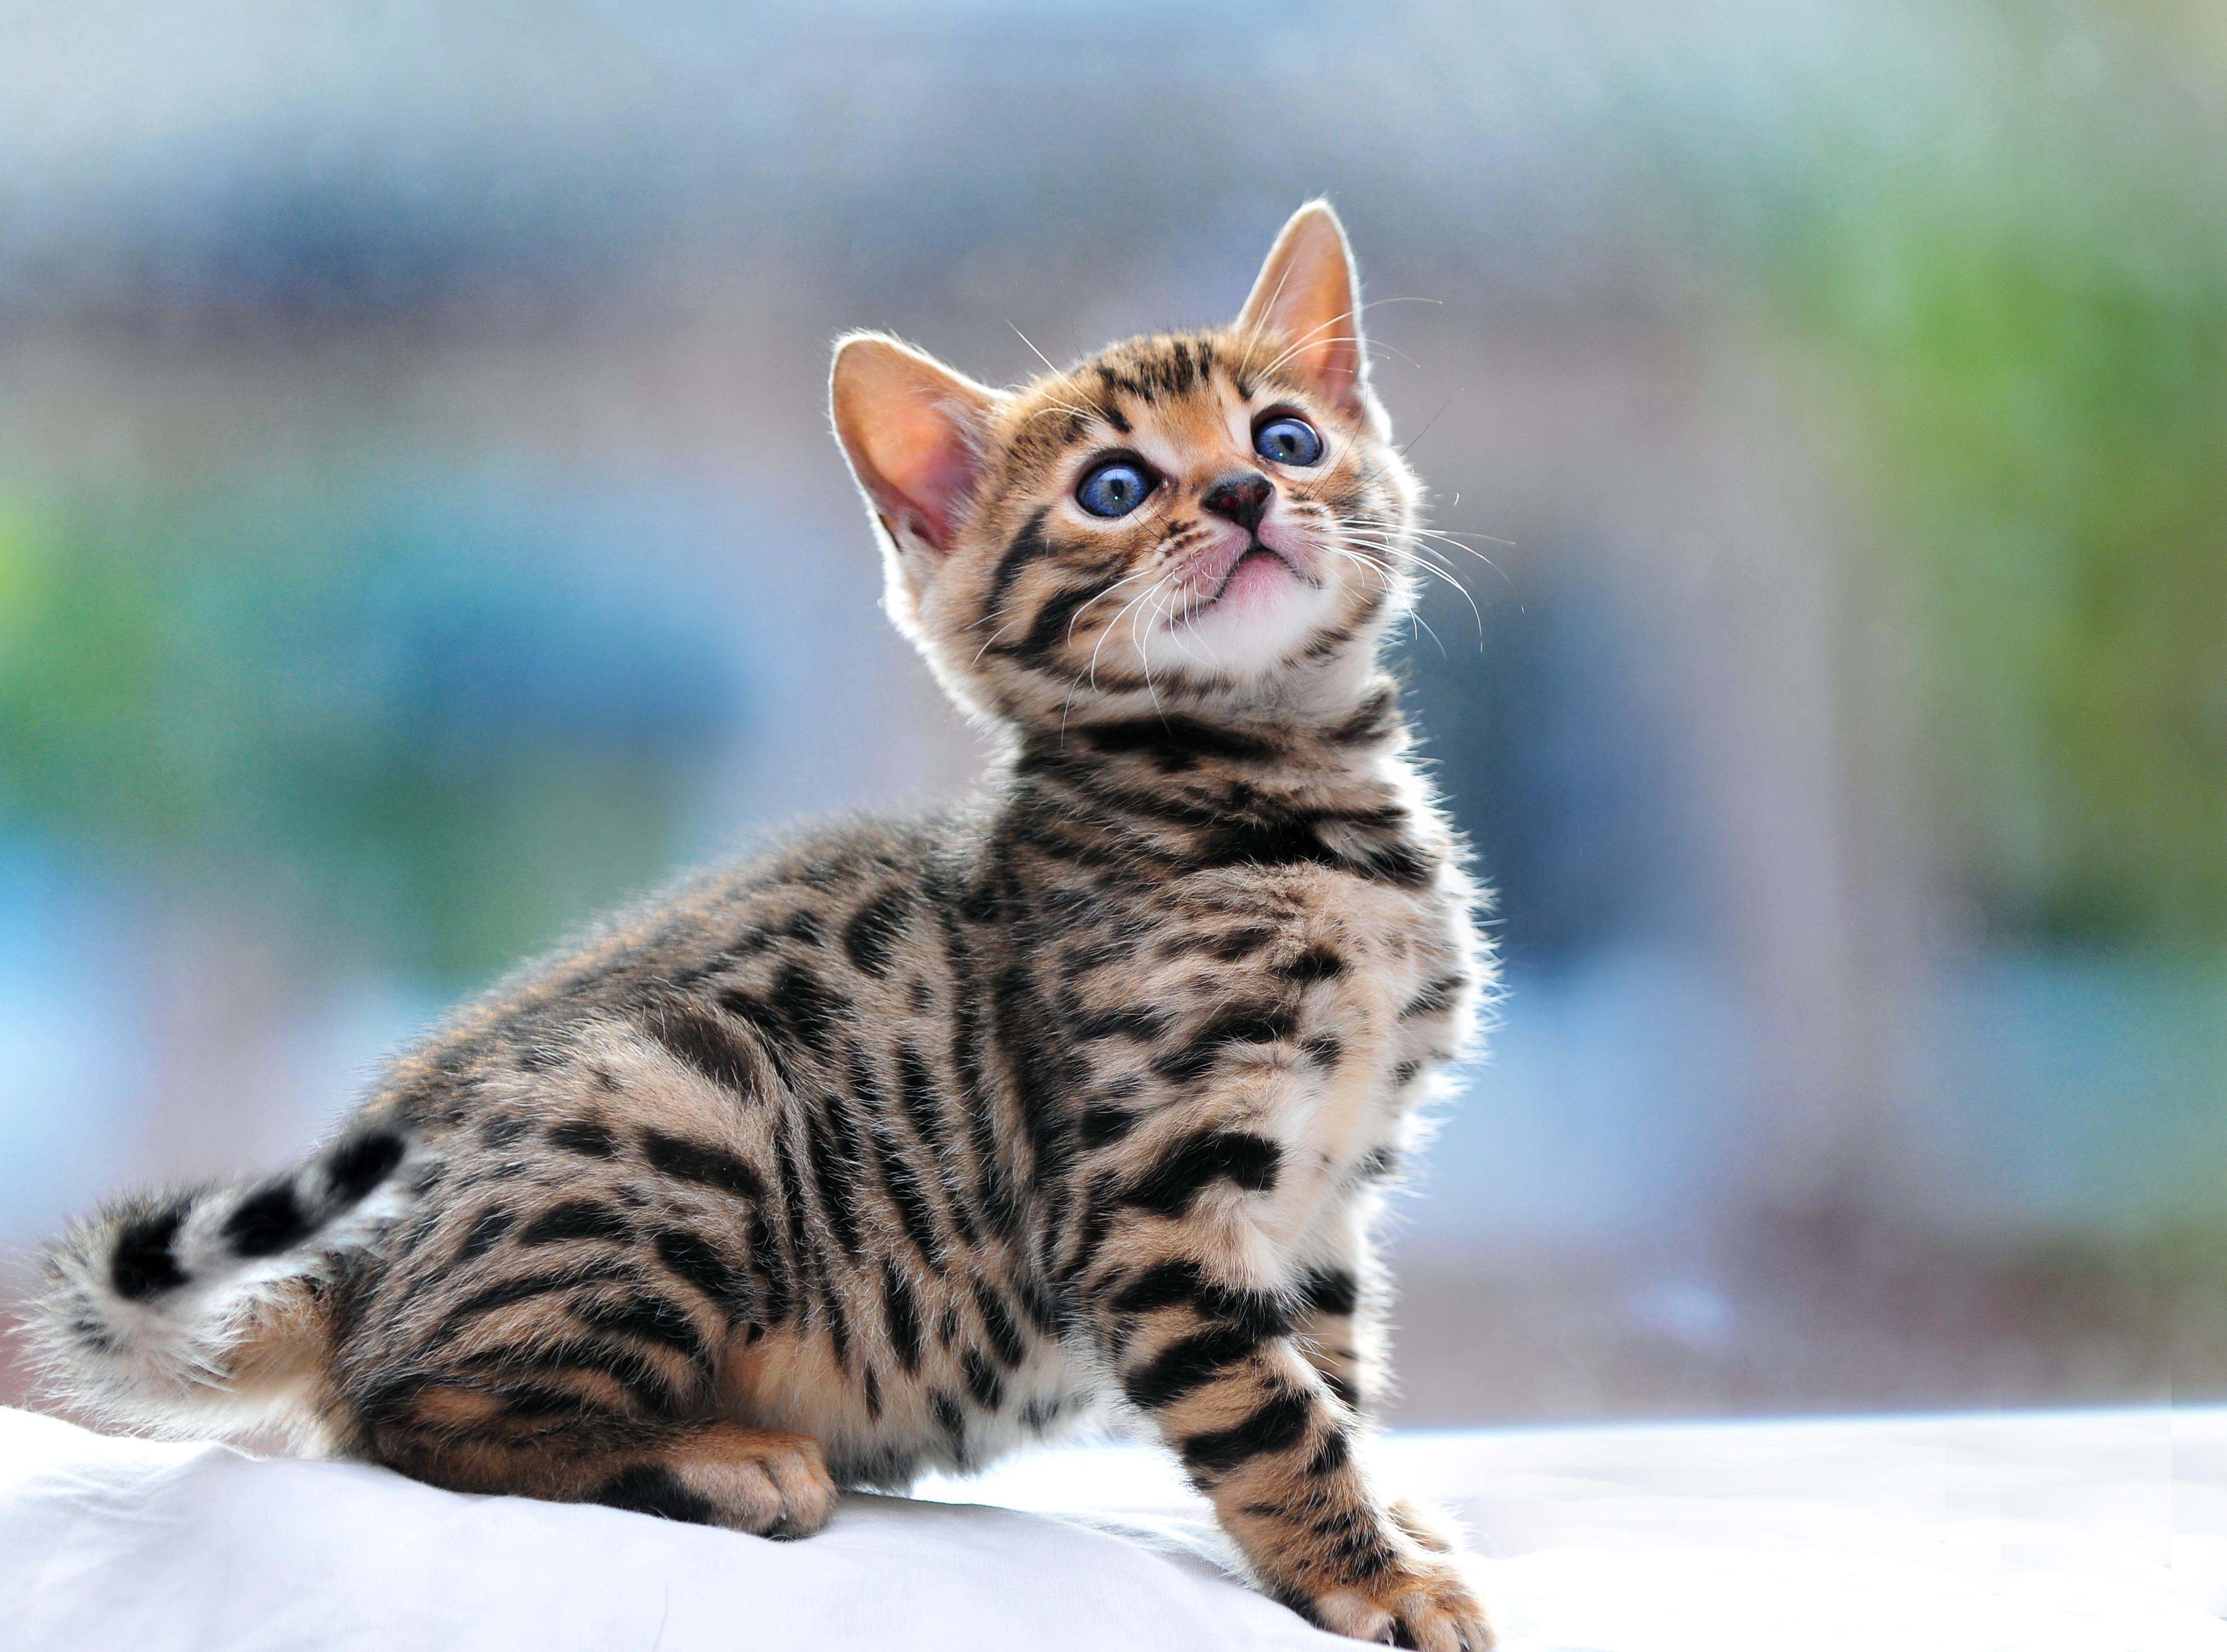 Small beautiful Bengal cat saw something wallpaper and image